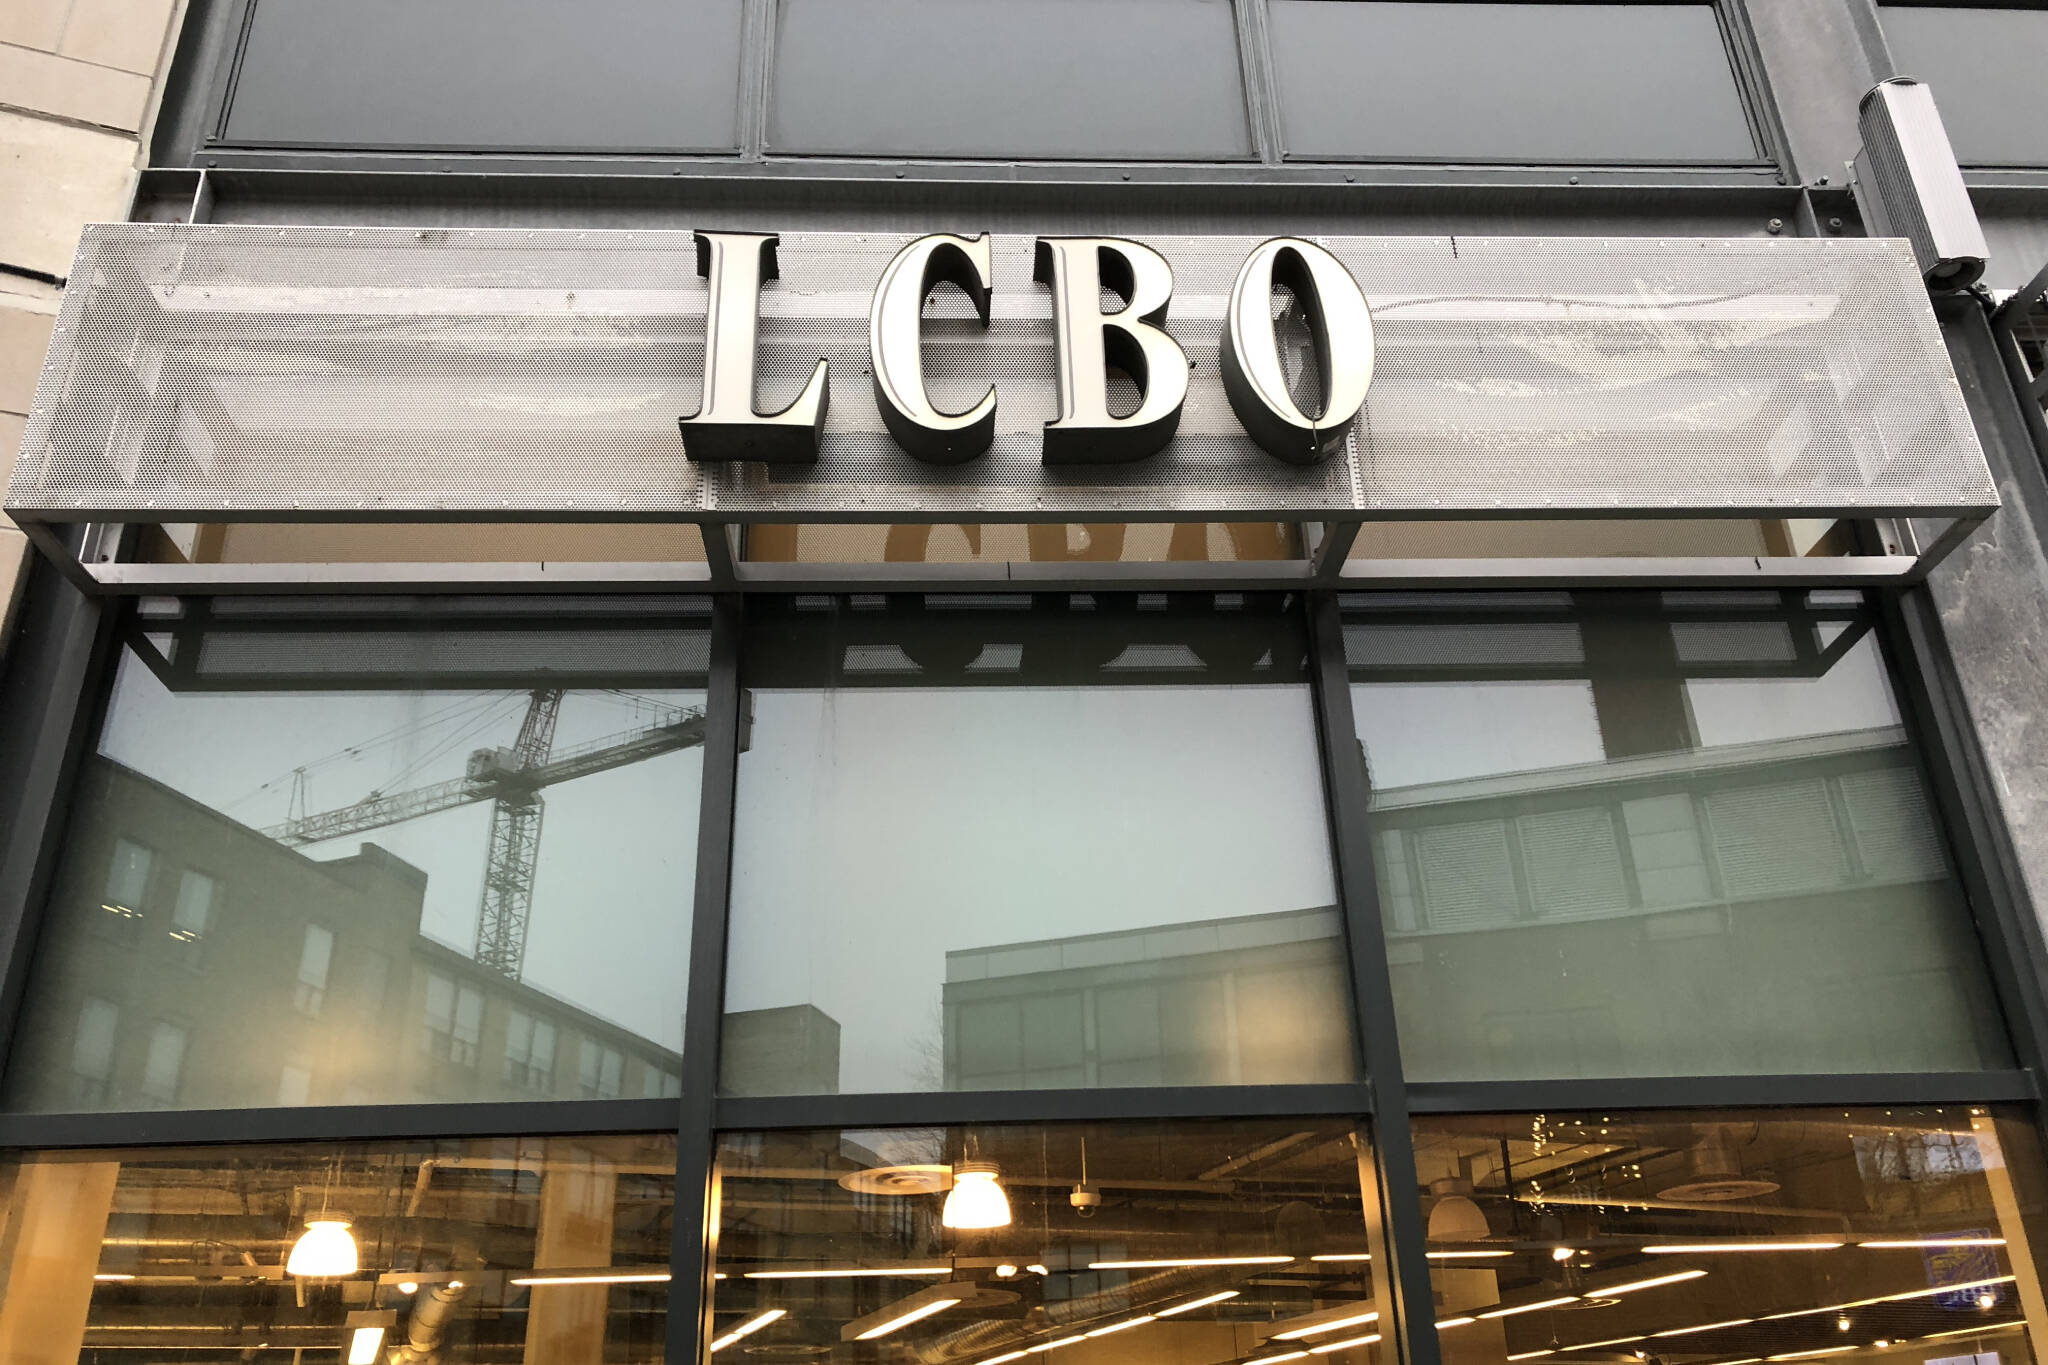 20181115 Lcbo Toronto ?w=2048&cmd=resize Then Crop&height=1365&quality=70